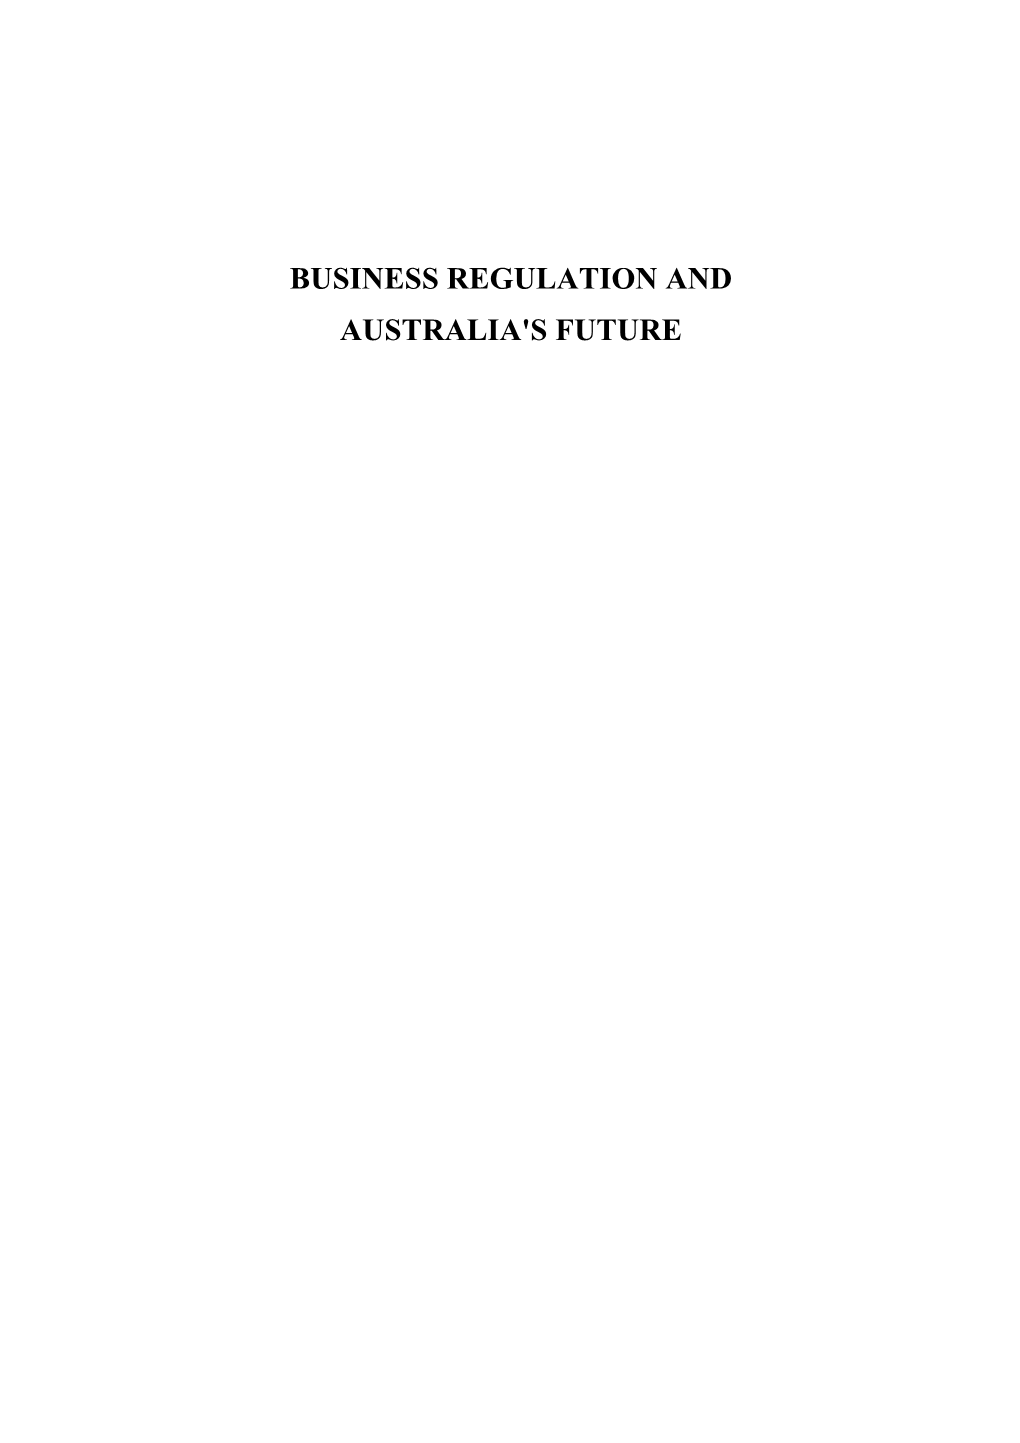 BUSINESS REGULATION and AUSTRALIA's FUTURE Australian Studies in Law, Crime and Justice Wayward Governance: Illegality and Its Control in the Public Sector by P.N